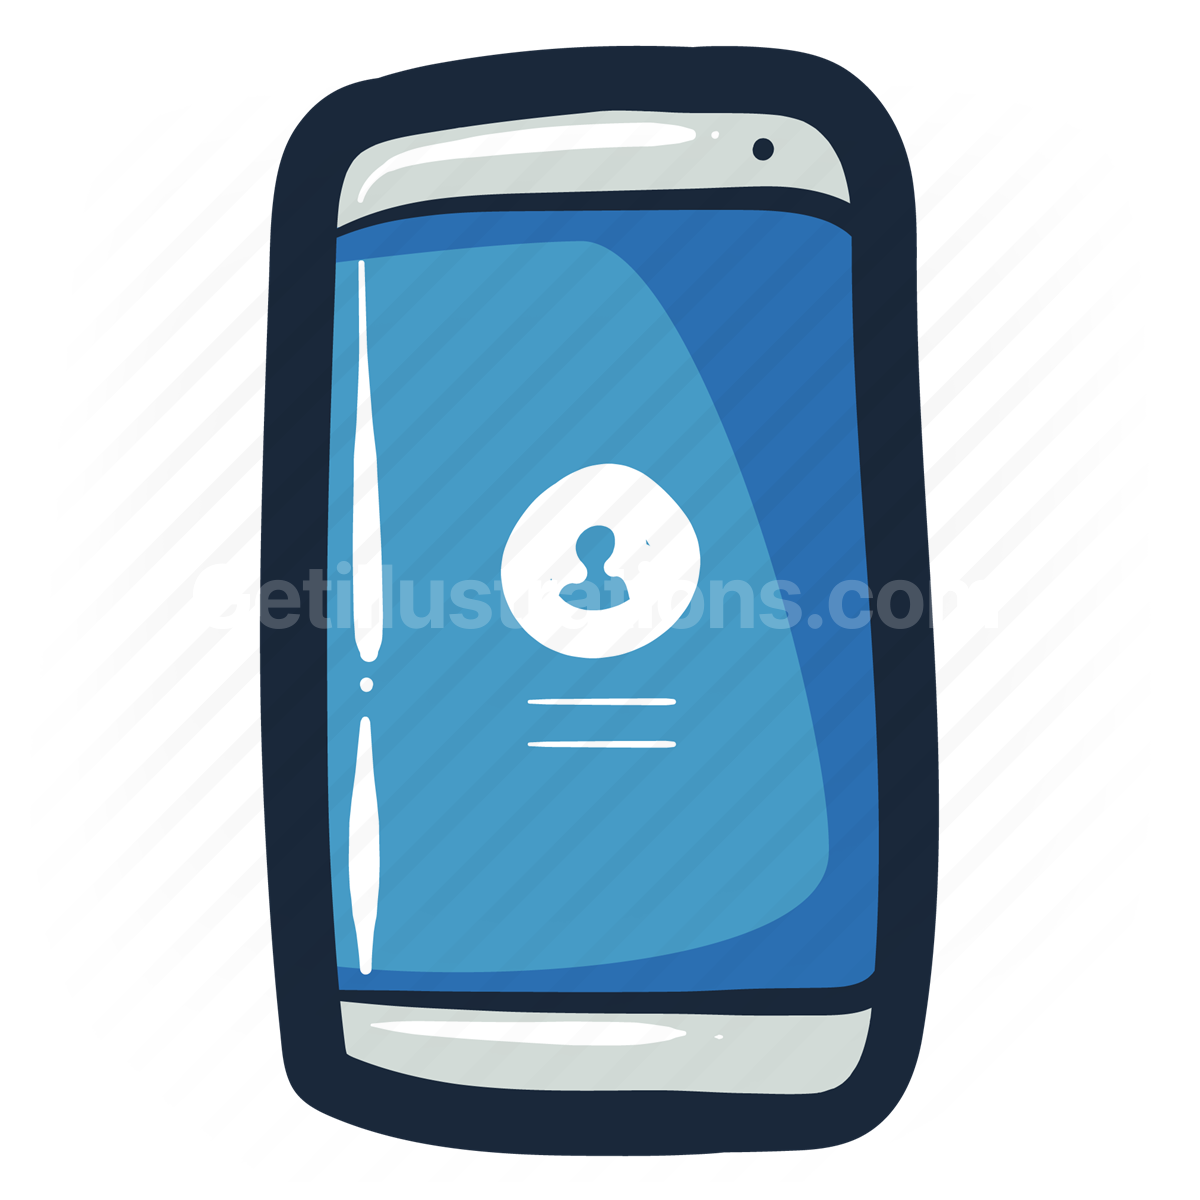 mobile, smartphone, phone, electronic, device, account, profile, login